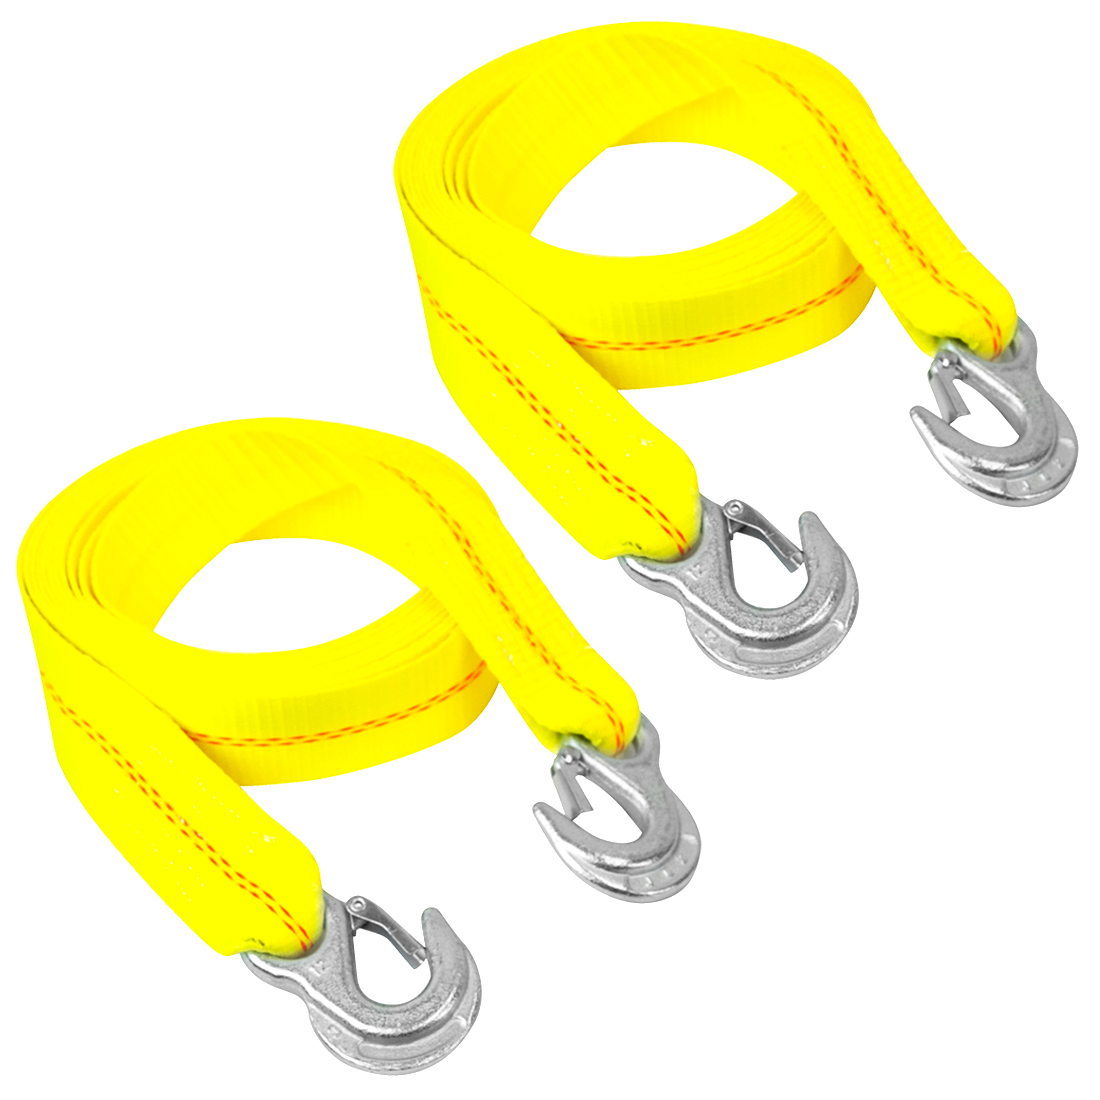 VULCAN Tow Strap with Snap Hooks - 2 Inch, 2 Pack - 3,000 Pound